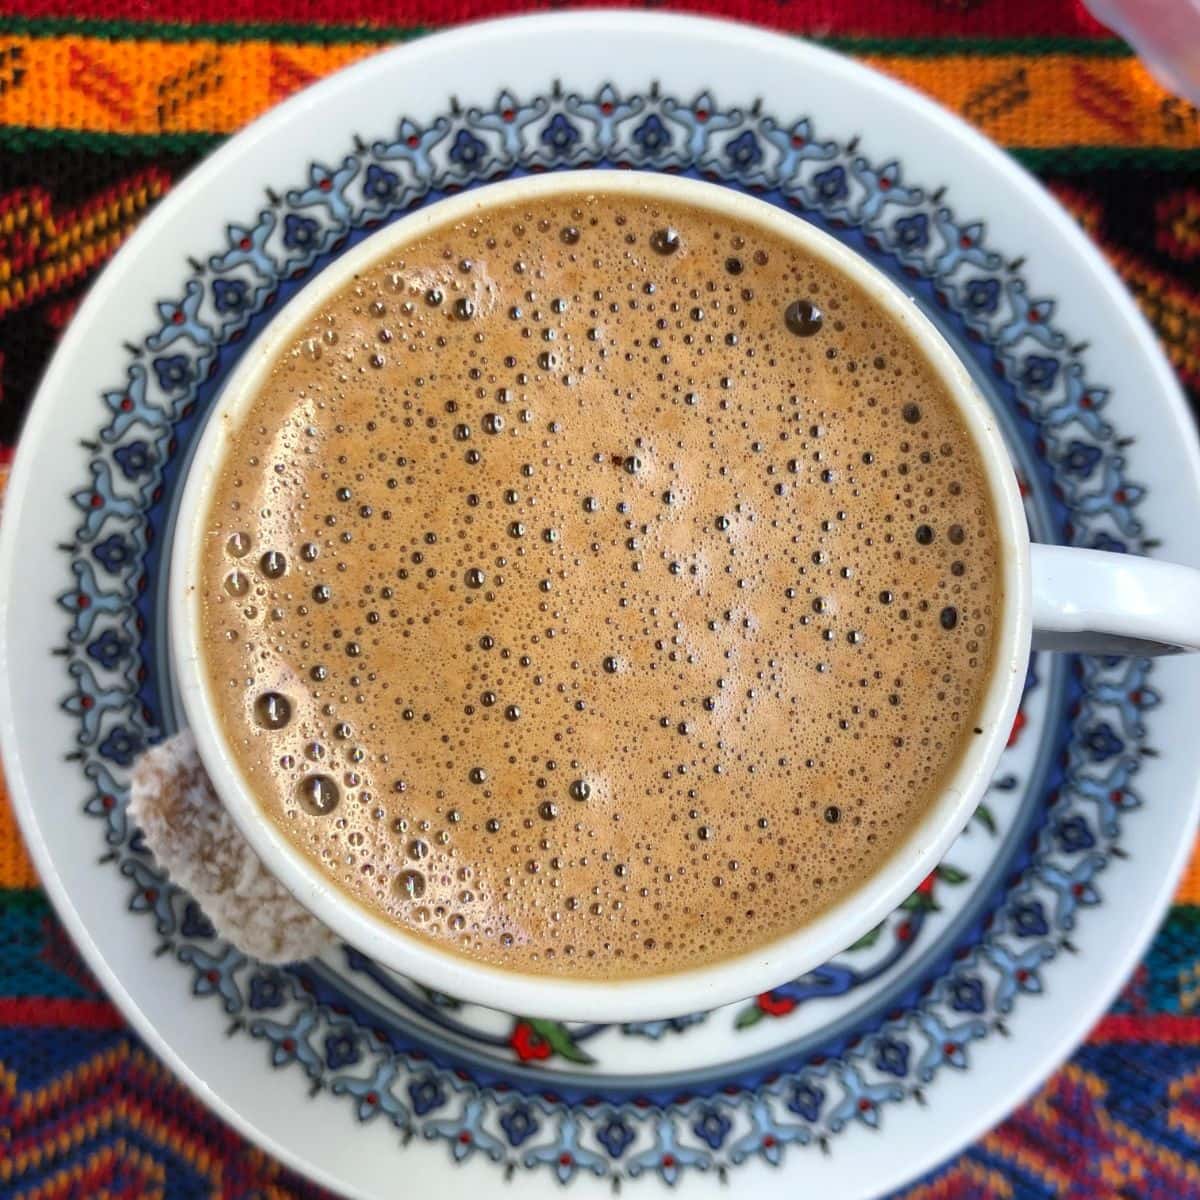 Turkish coffee shot from above to capture the foam on top on a traditional red and blue tulip style saucer